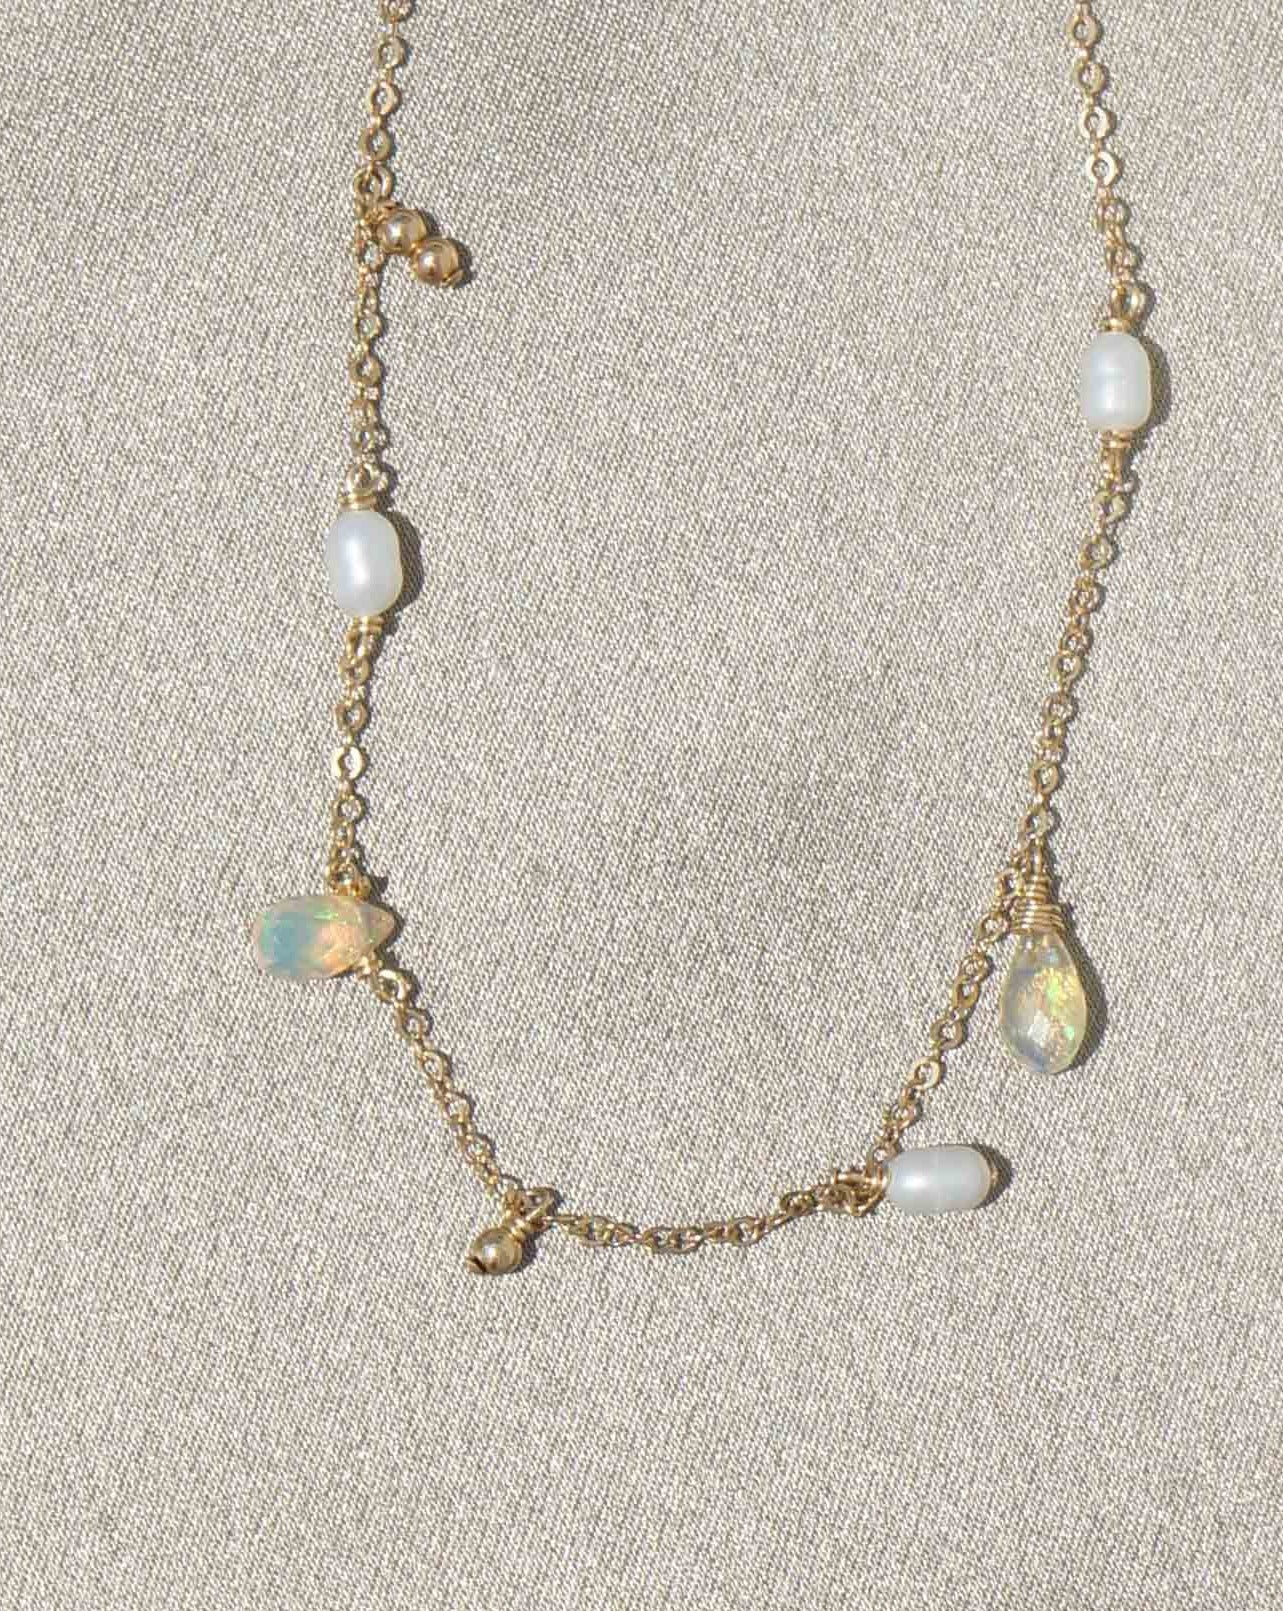 Genevieve Necklace by KOZAKH. A 16 to 18 inch adjustable length necklace in 14K Gold Filled, featuring 3-4mm white rice Pearls and 5-6mm faceted Ethiopian Opal droplets.